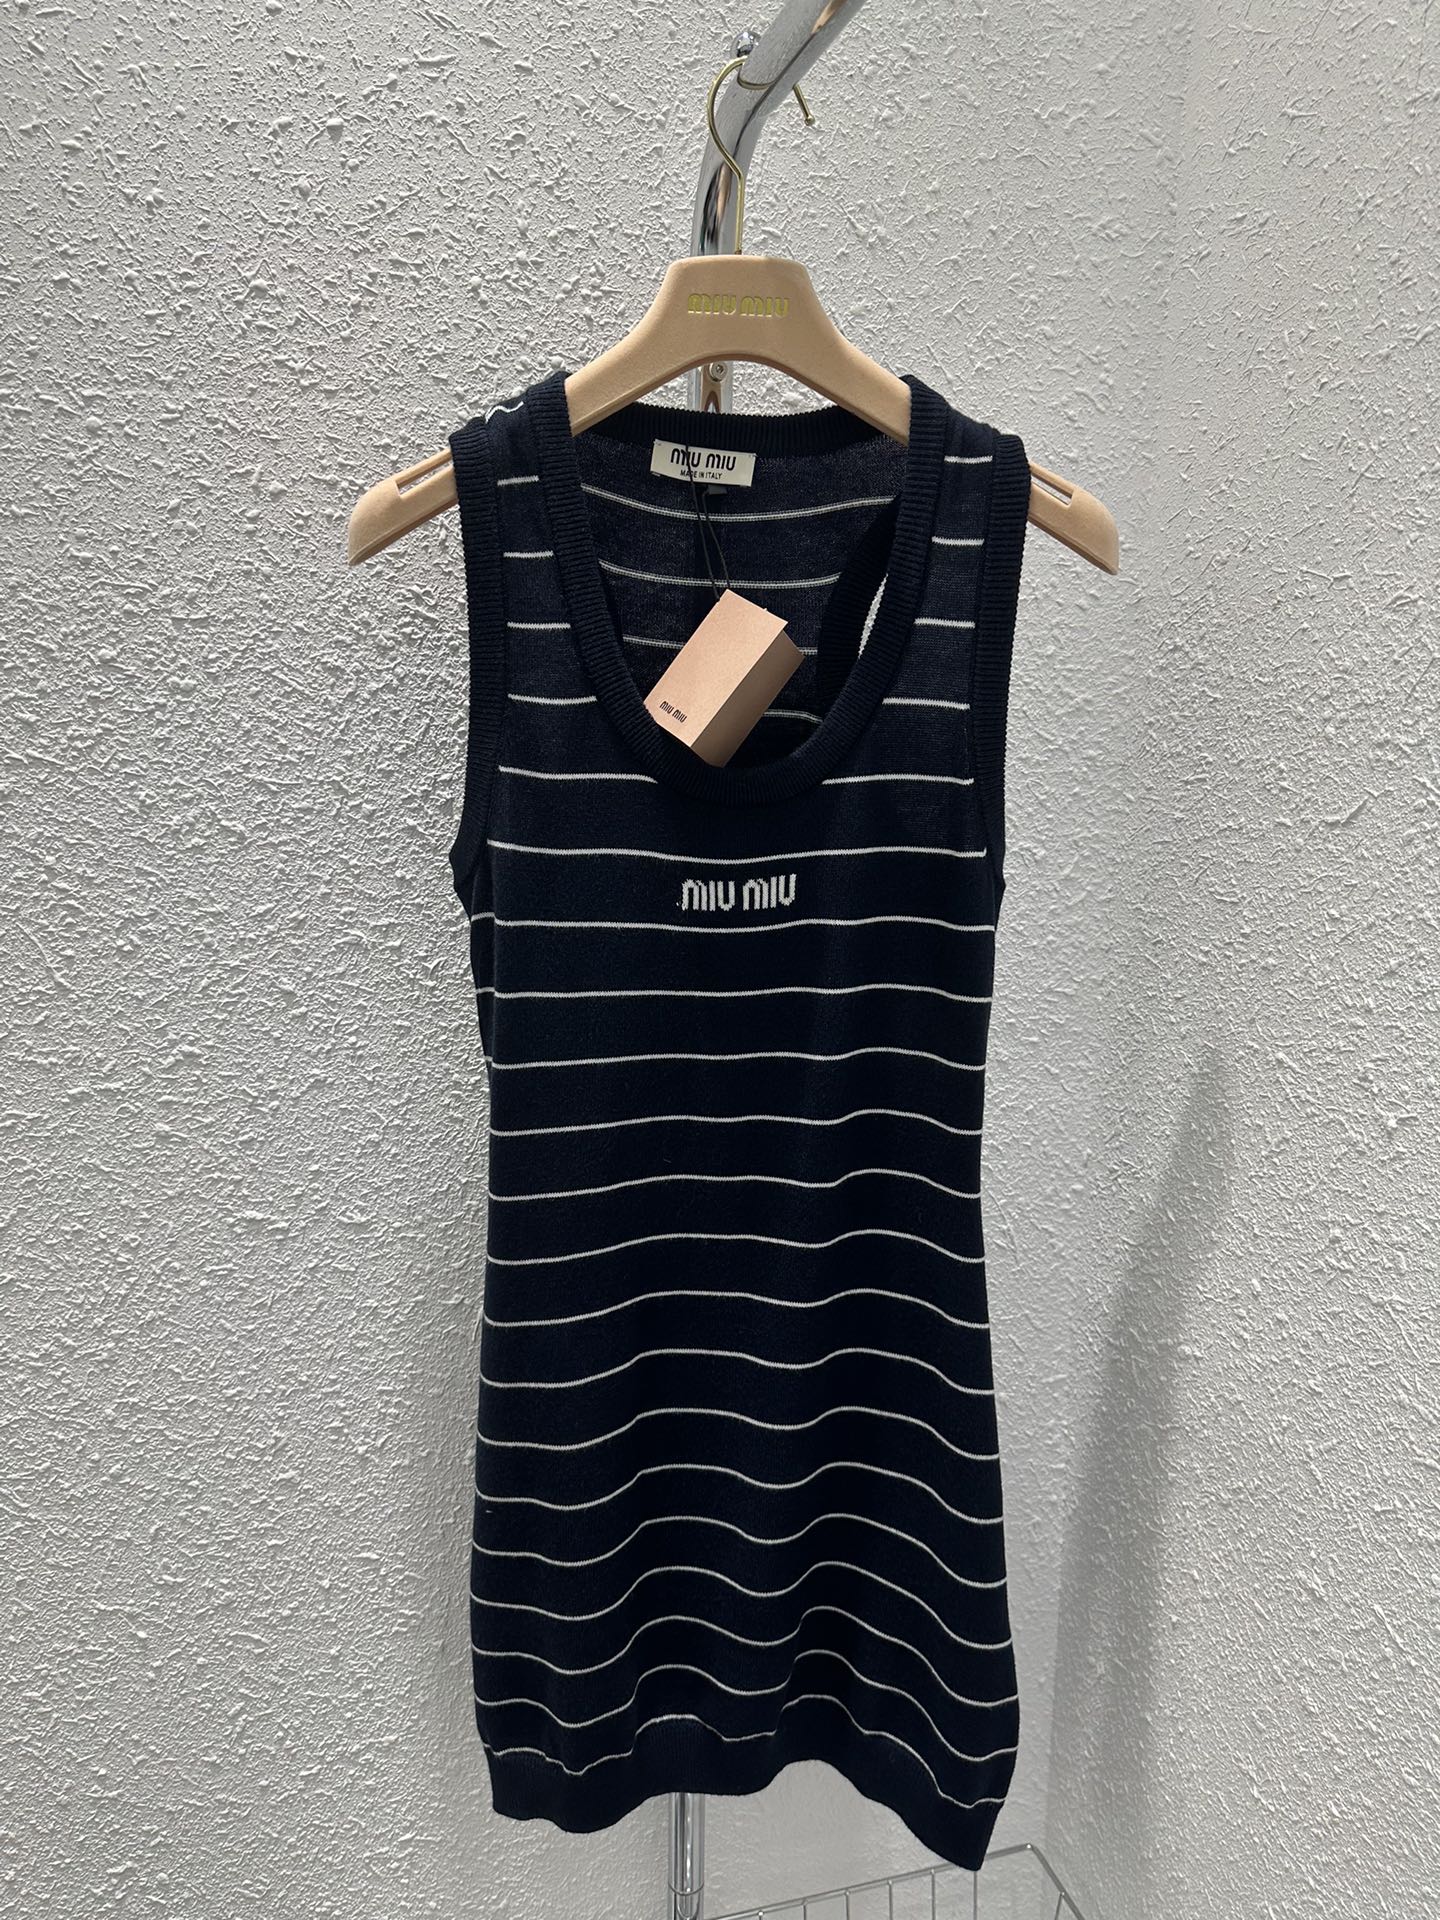 MiuMiu Clothing Dresses Tank Tops&Camis Luxury Fashion Replica Designers
 Black White Knitting Wool Spring/Summer Collection